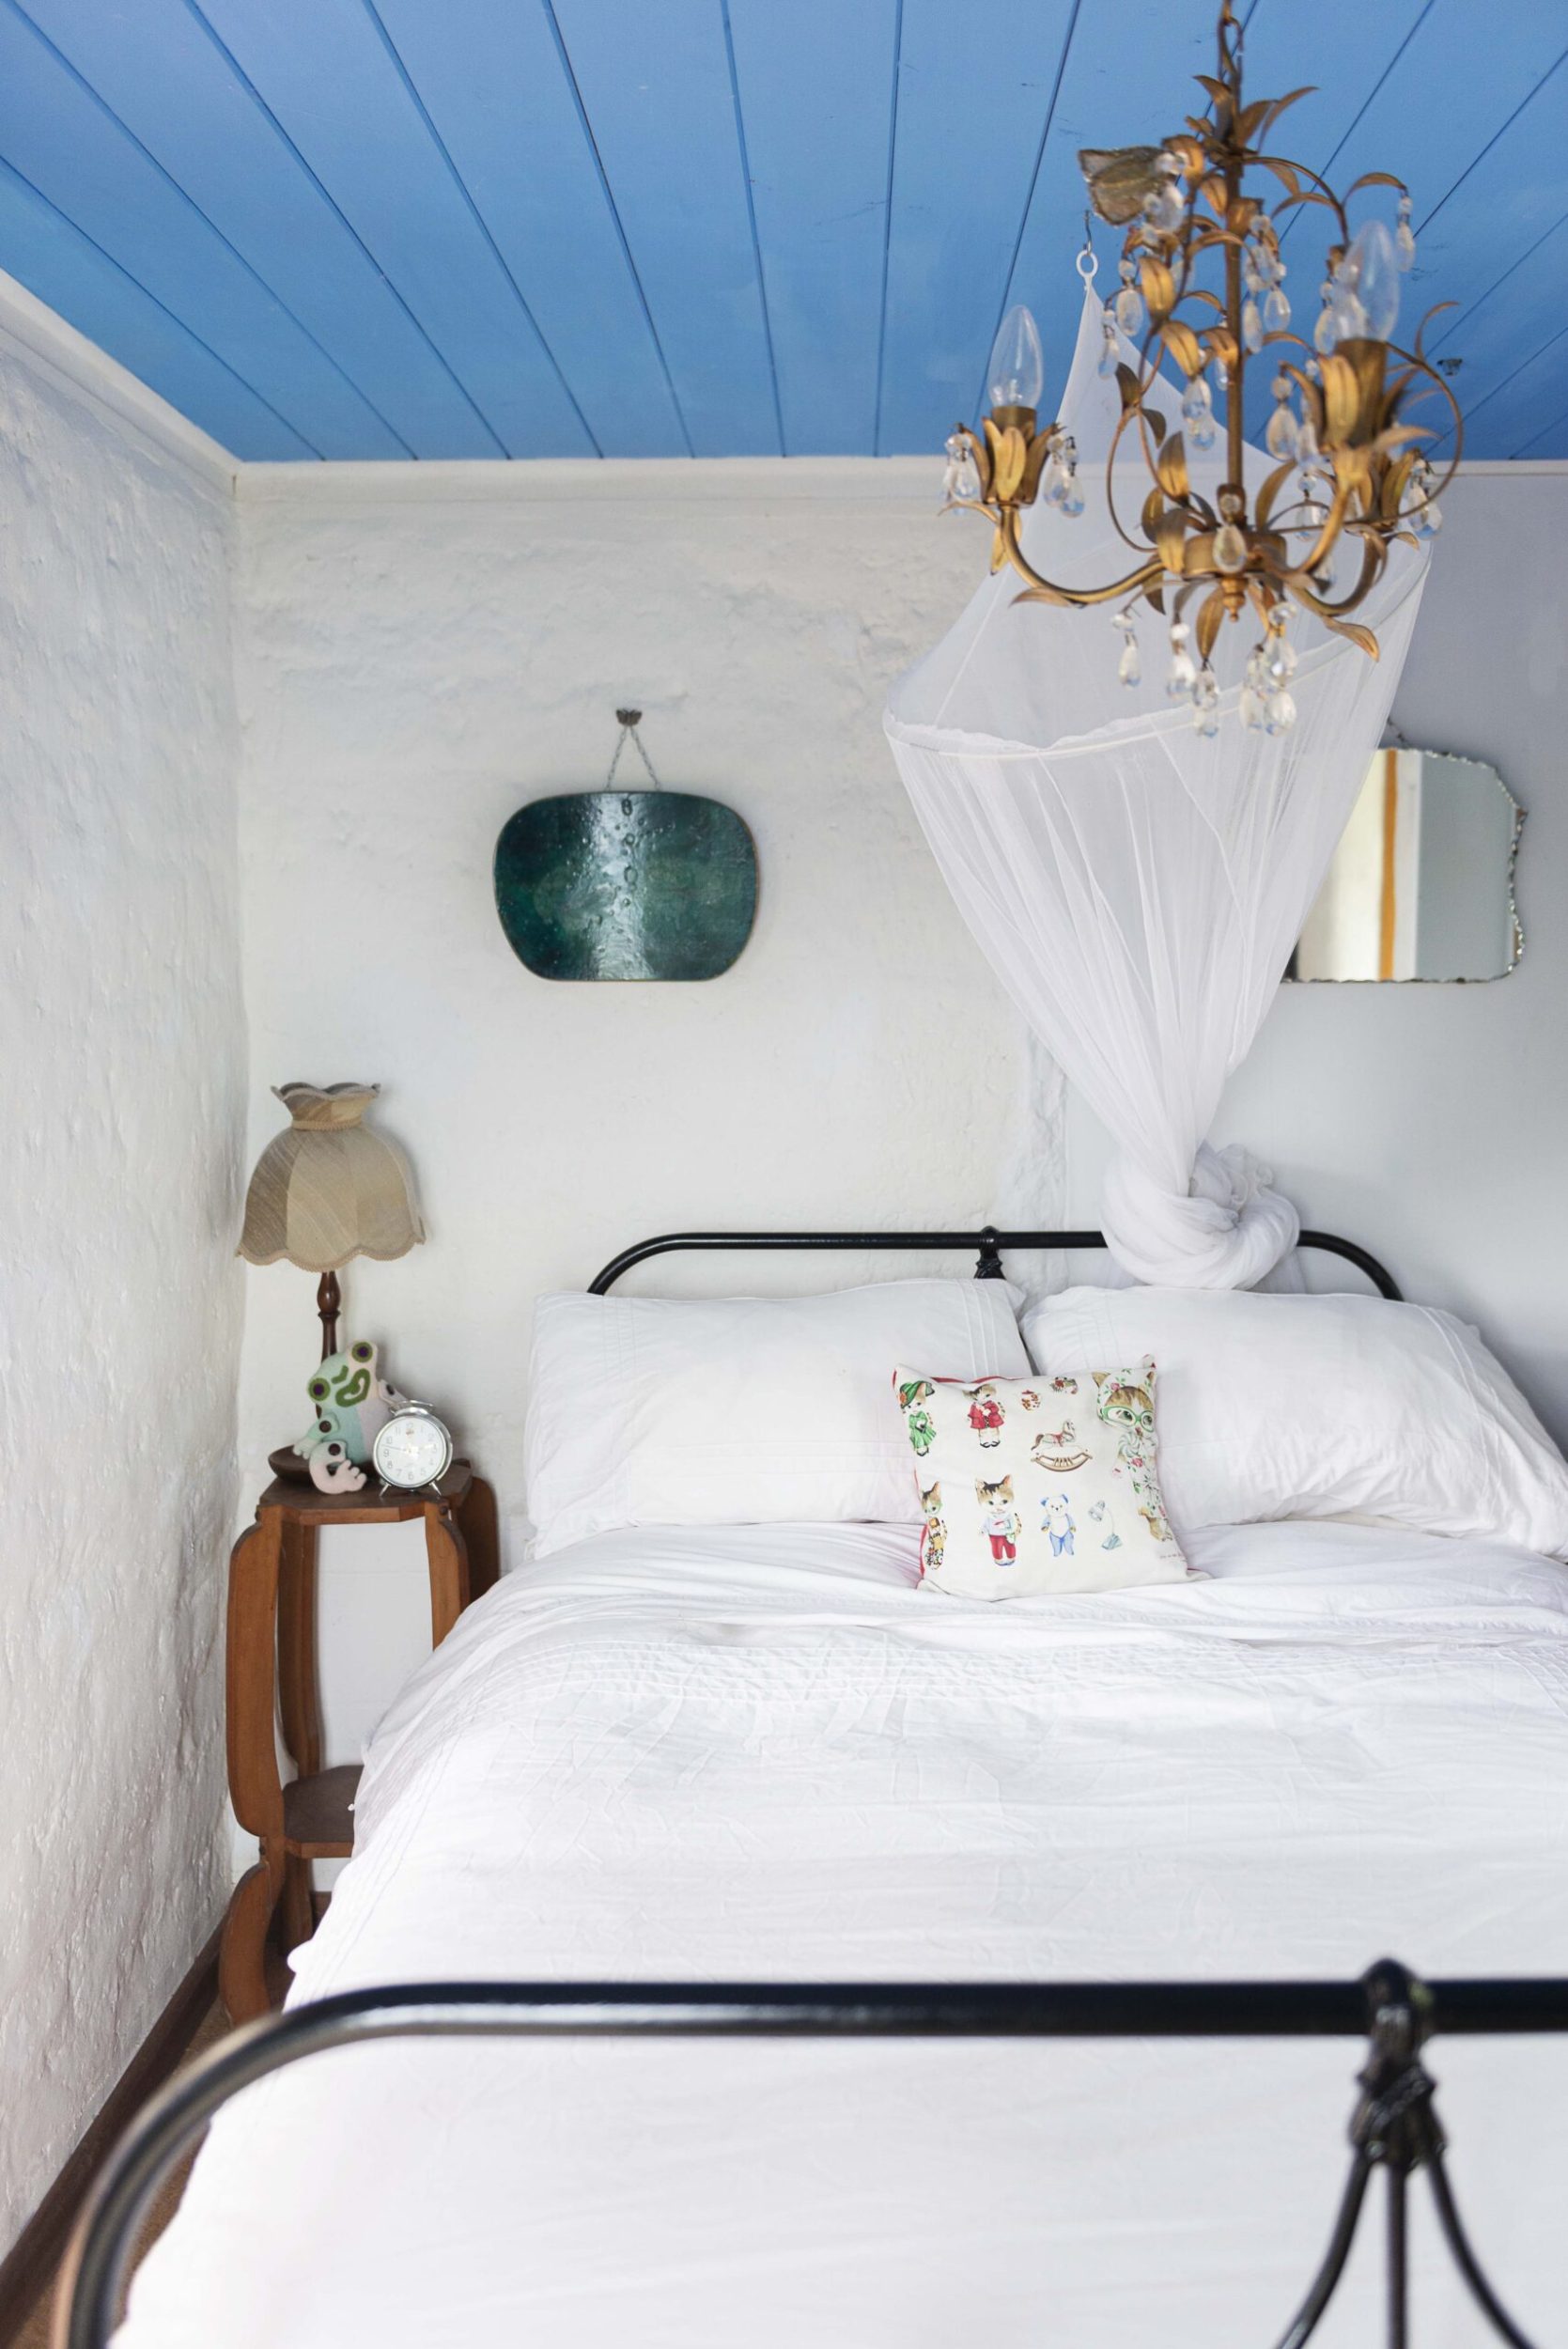 A bedroom with white walls, blue panel ceilings, a gold chandelier and a bed with a black frame